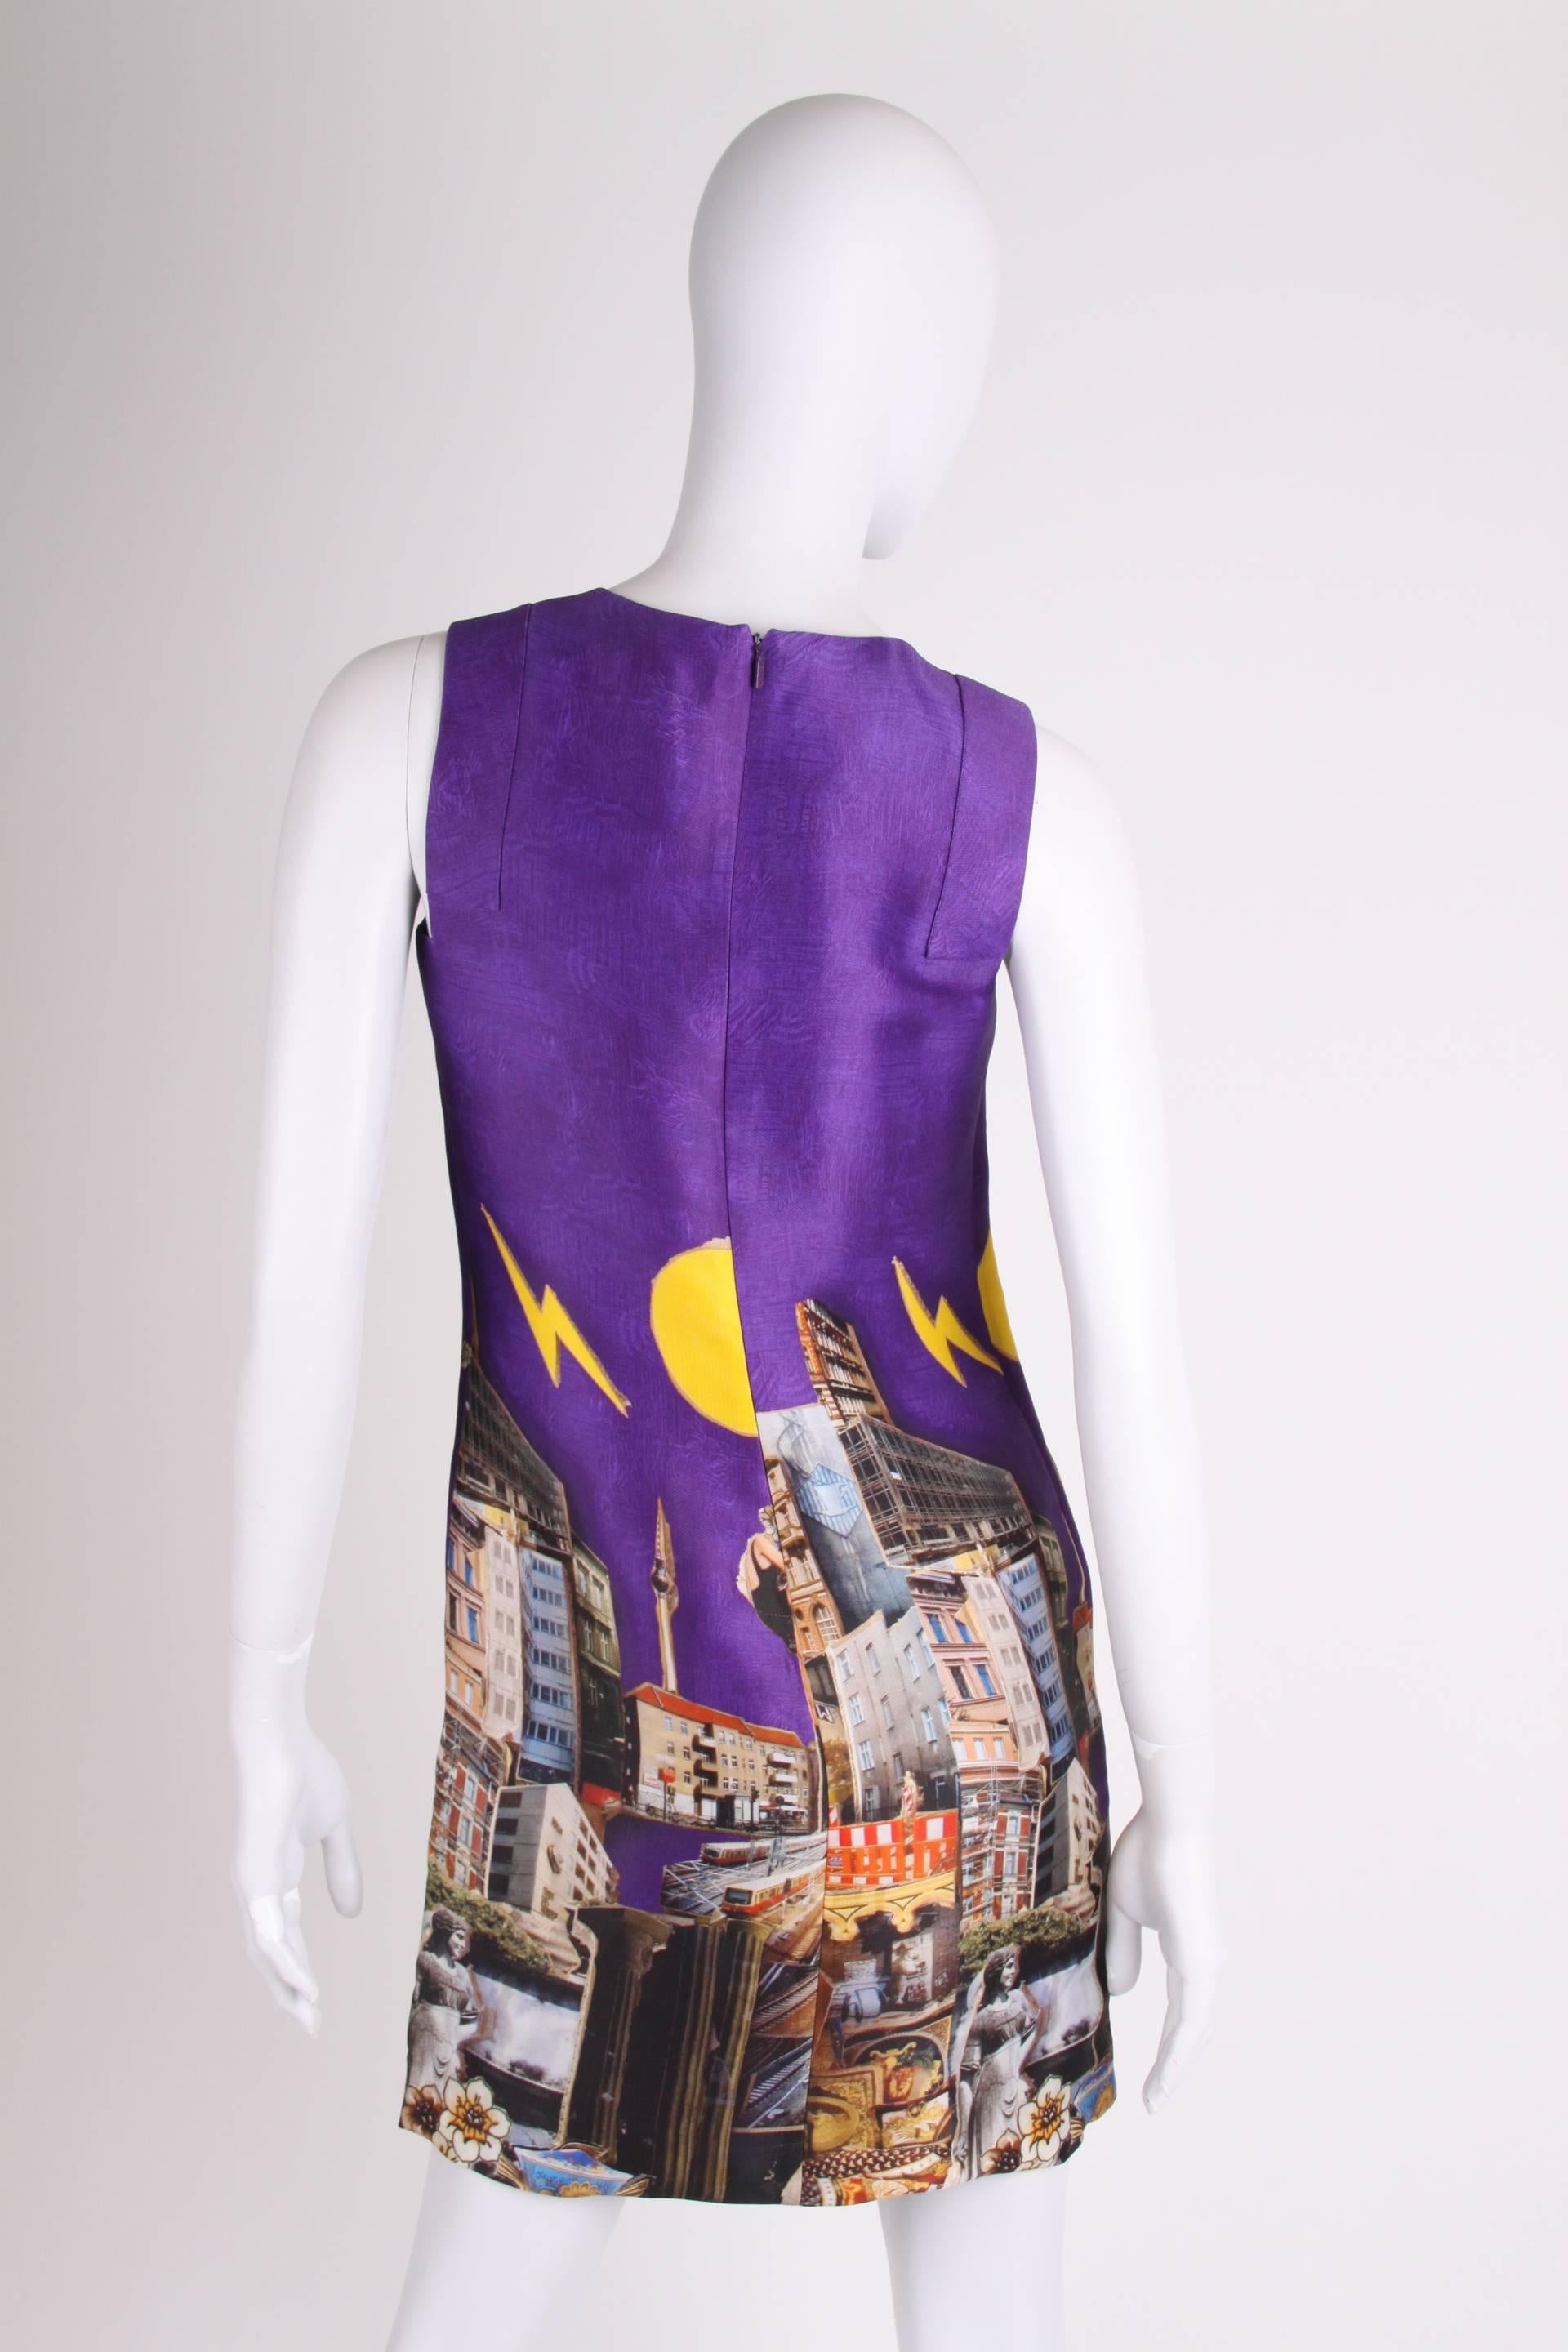 This Versace dress from the fall/winter collection of 2008 was designed by a very special couple: Donatella Versace and the Dutch artist Tim Roeloffs. Highly collectable!

The beautiful and colourful print is based on images of Berlin, the main